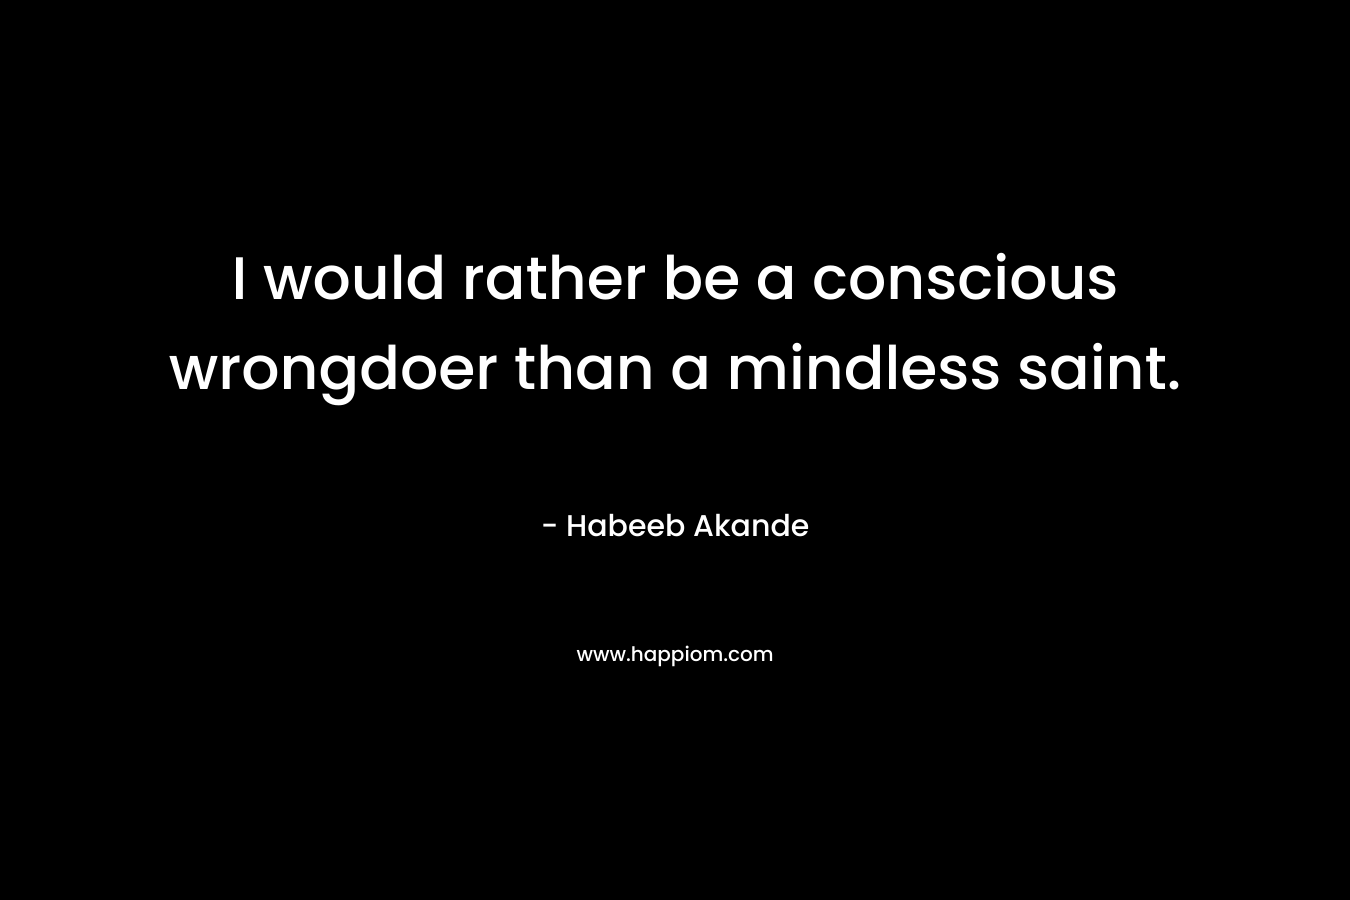 I would rather be a conscious wrongdoer than a mindless saint. – Habeeb Akande